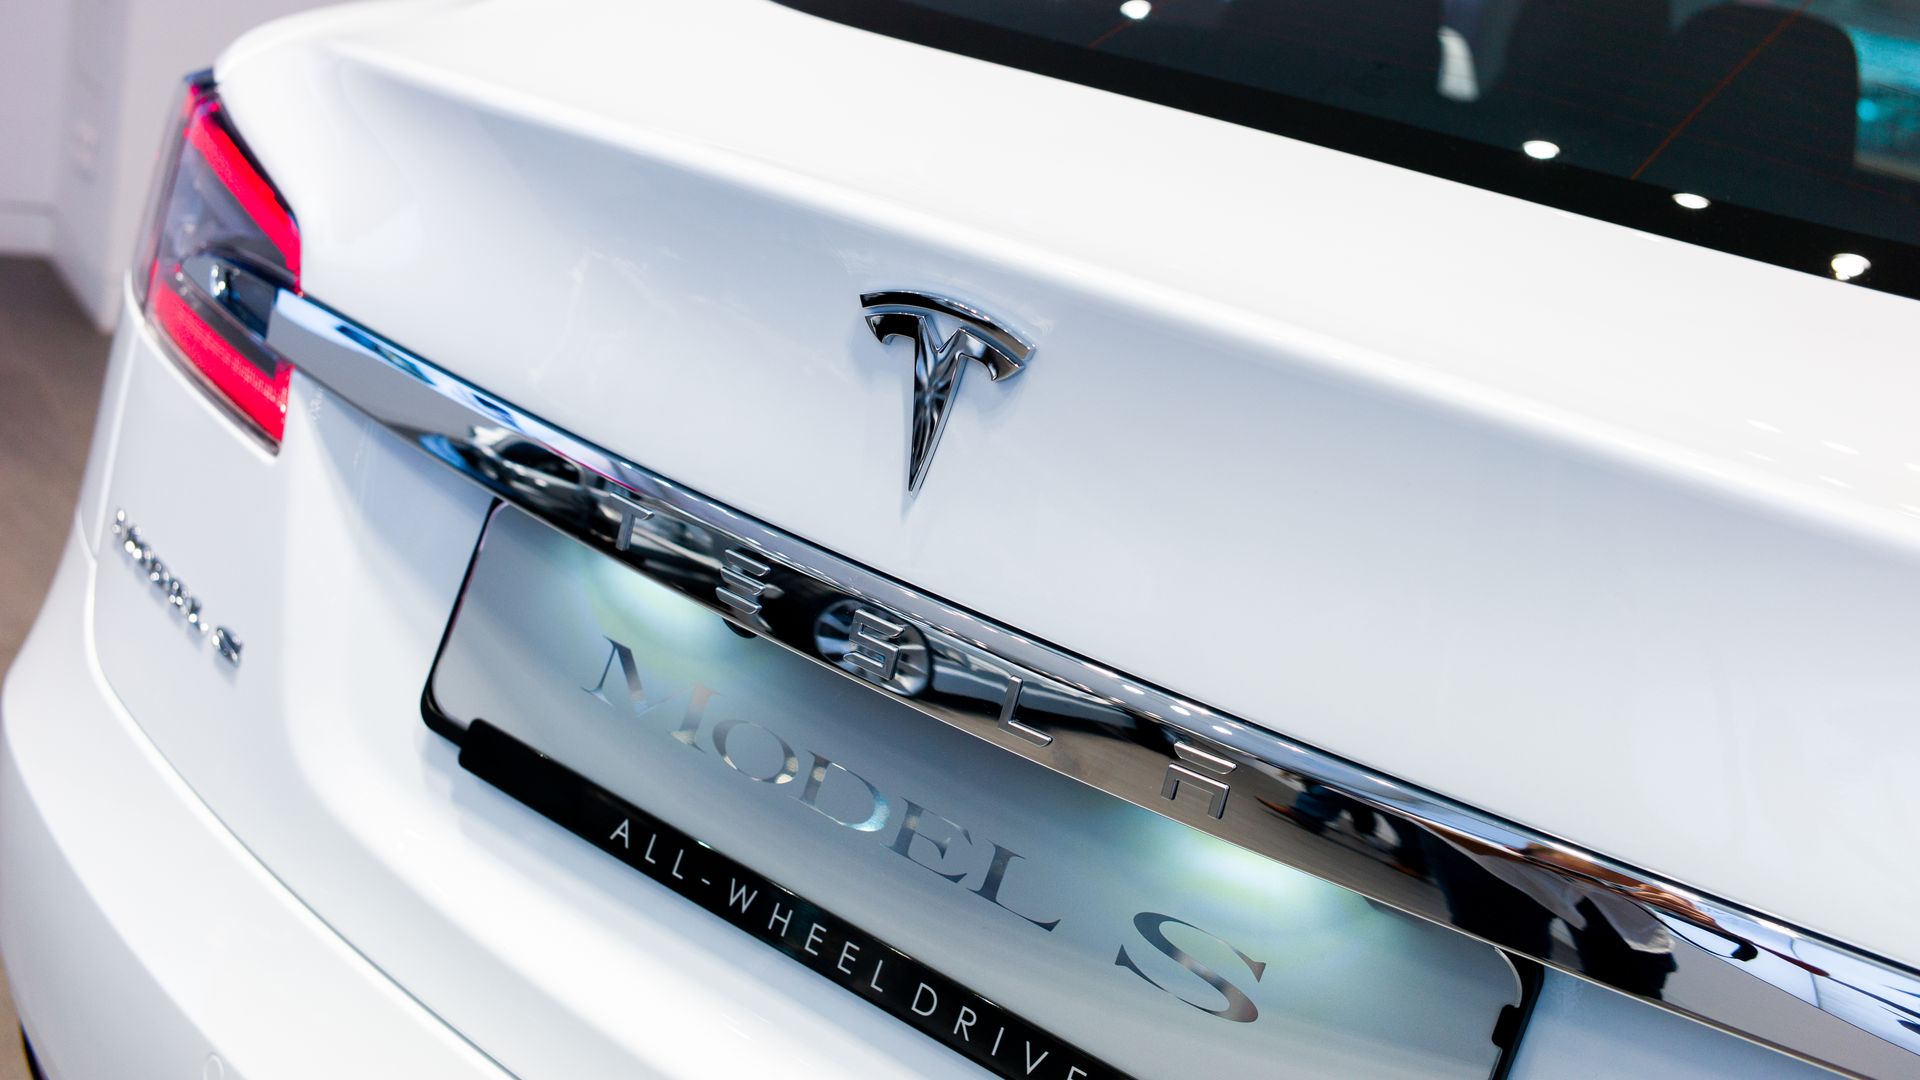 This image is the rear end of a Tesla Model S car.